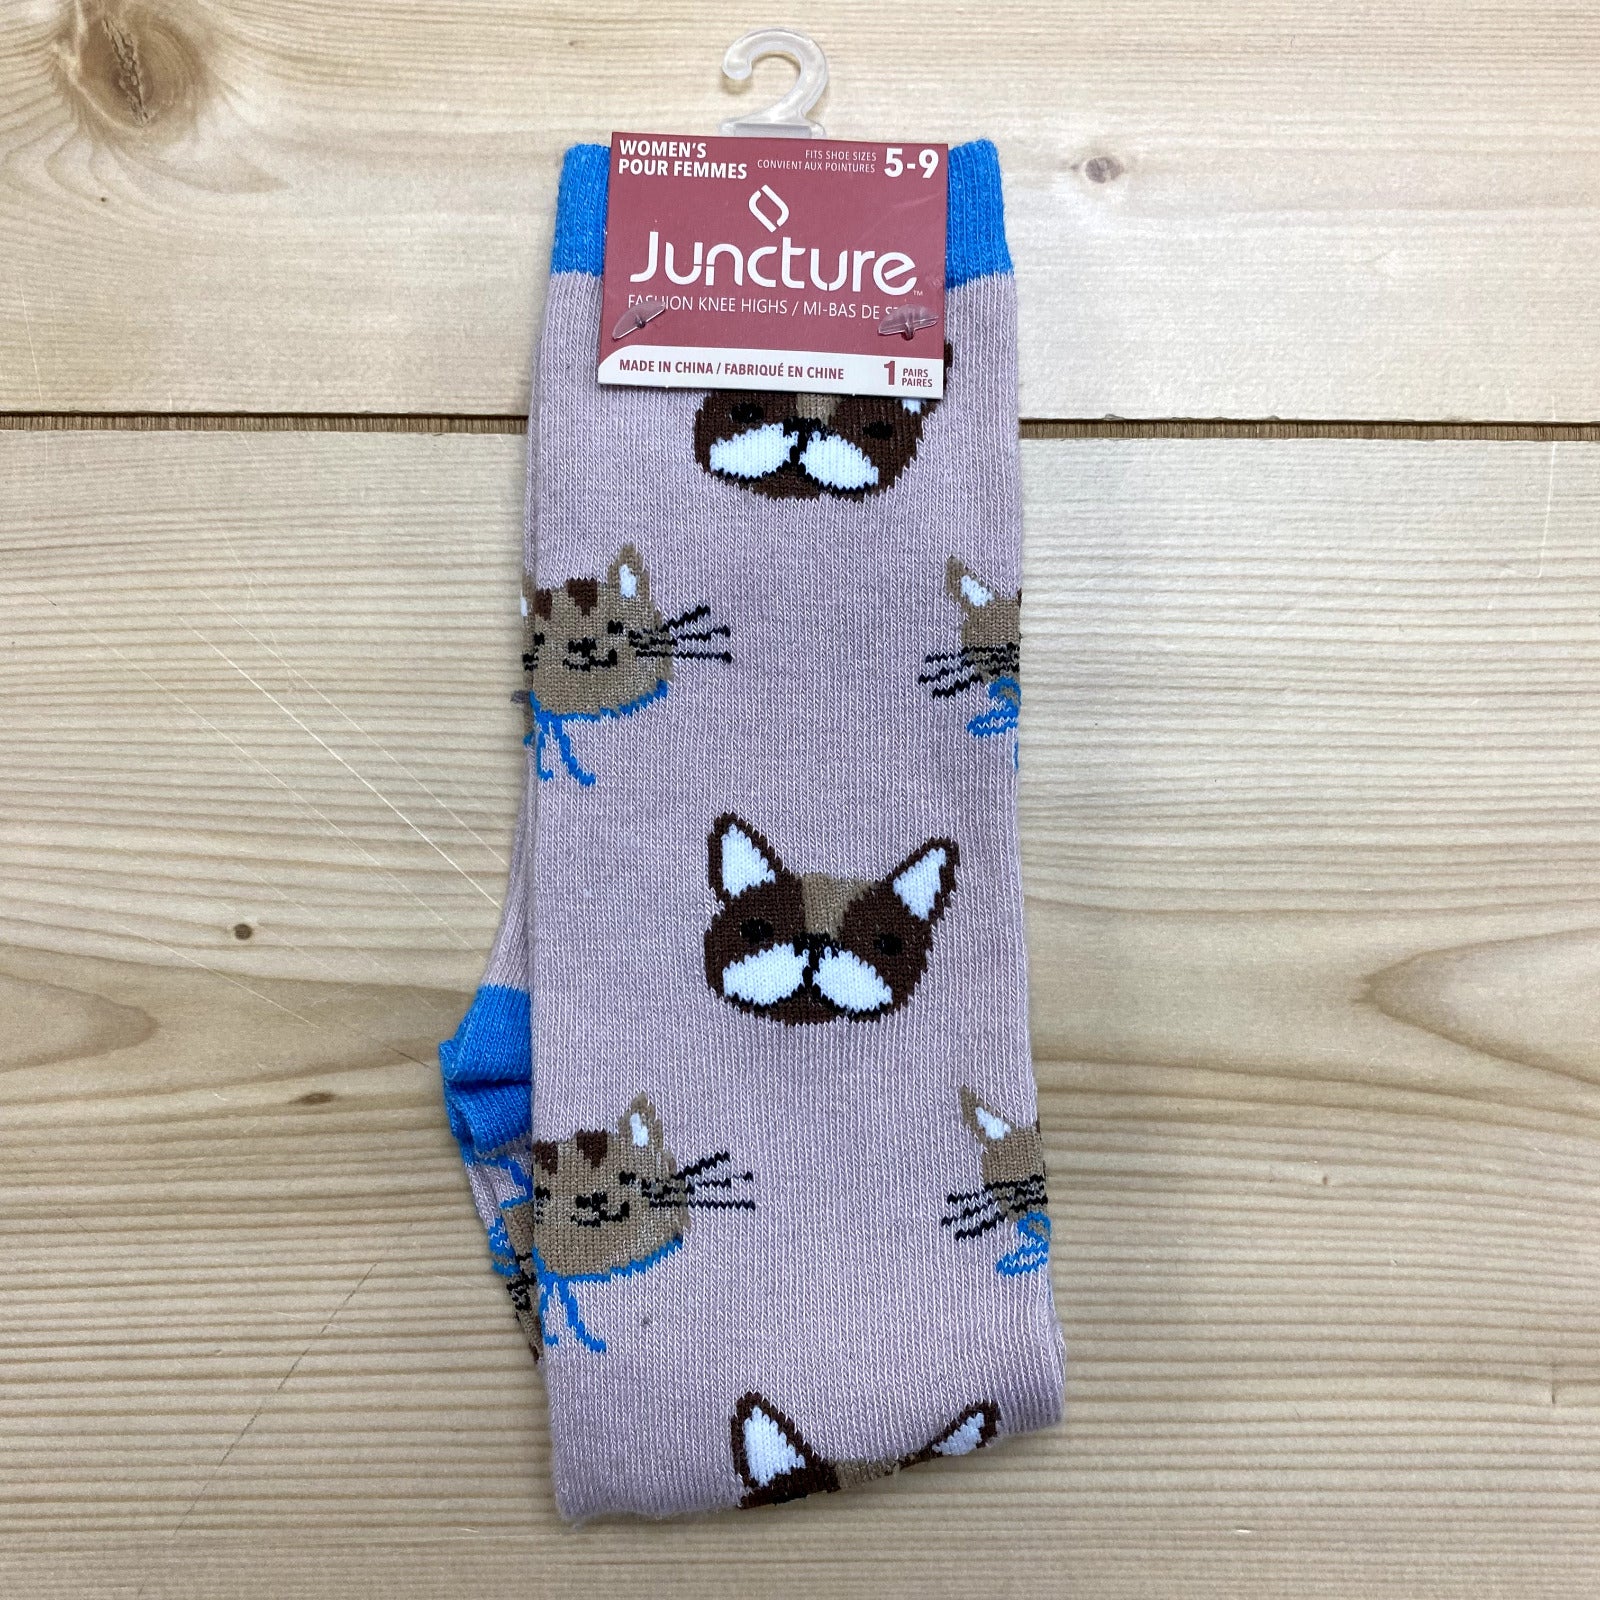 NEW Juncture Pink & Blue Cat & Dog Face Print Knee High Socks Women Size 5-9